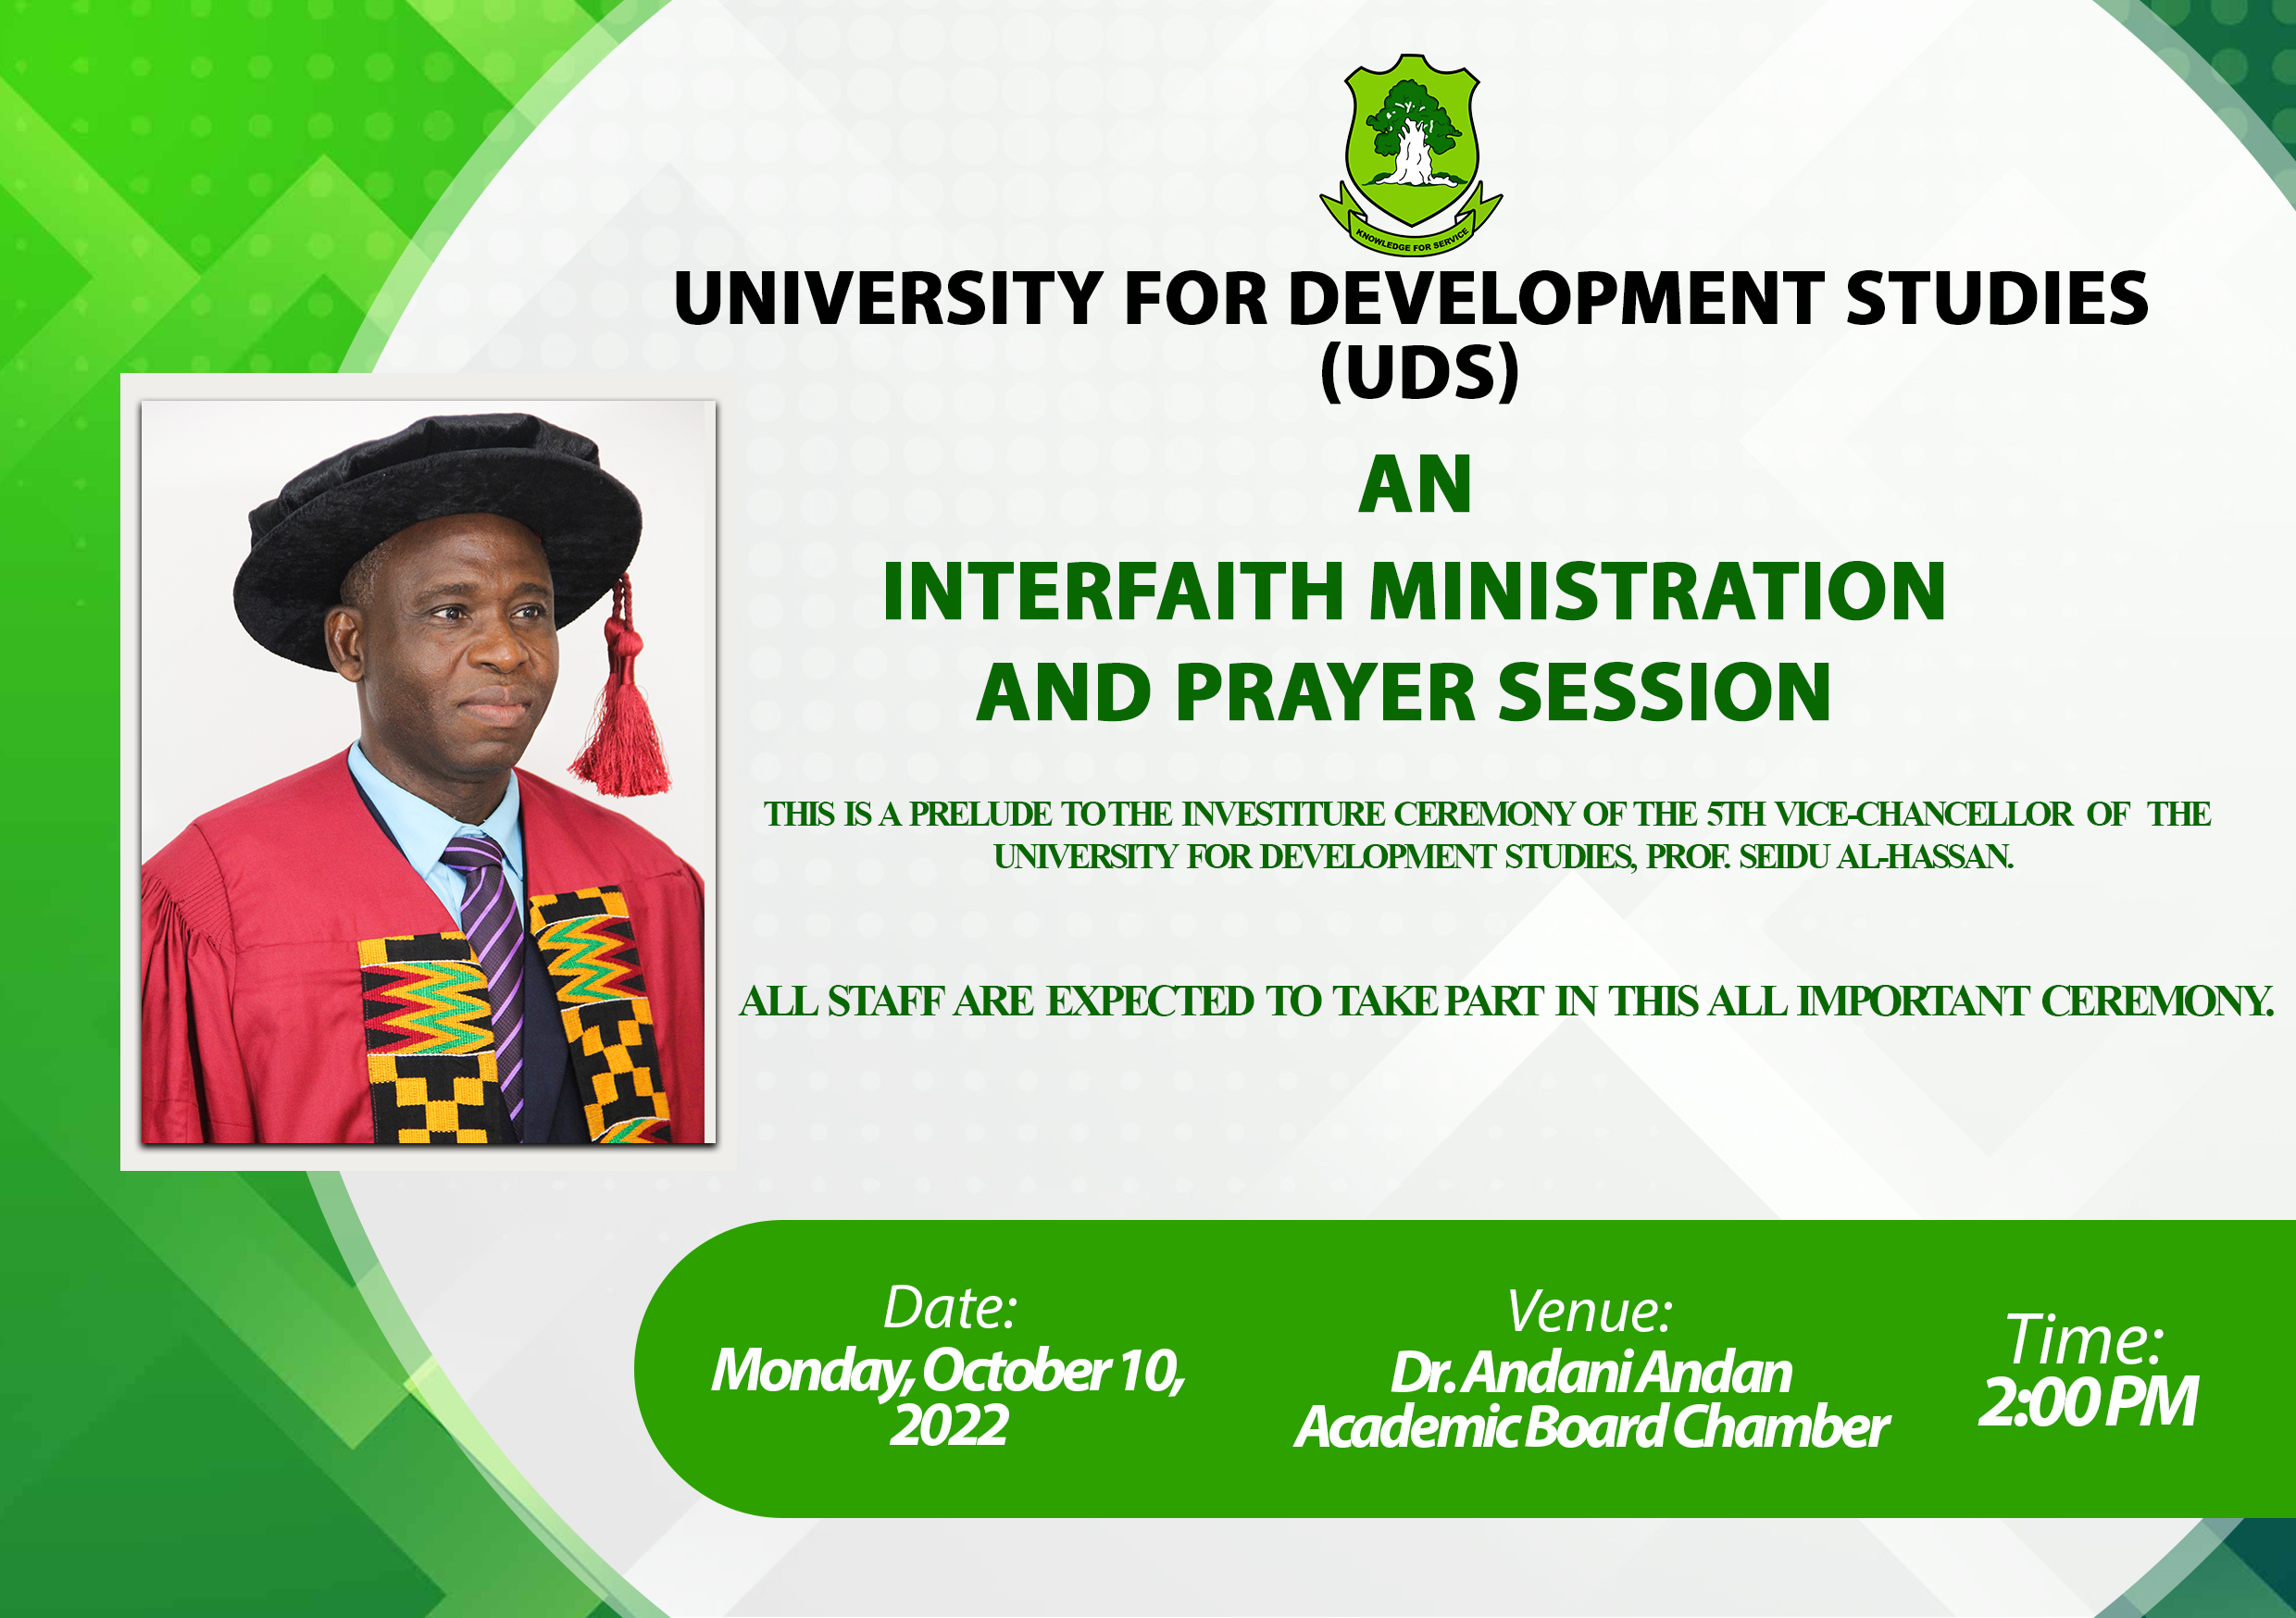 UDS to Observe Interfaith Prayer and Ministration Service on Monday, October 10, 2022